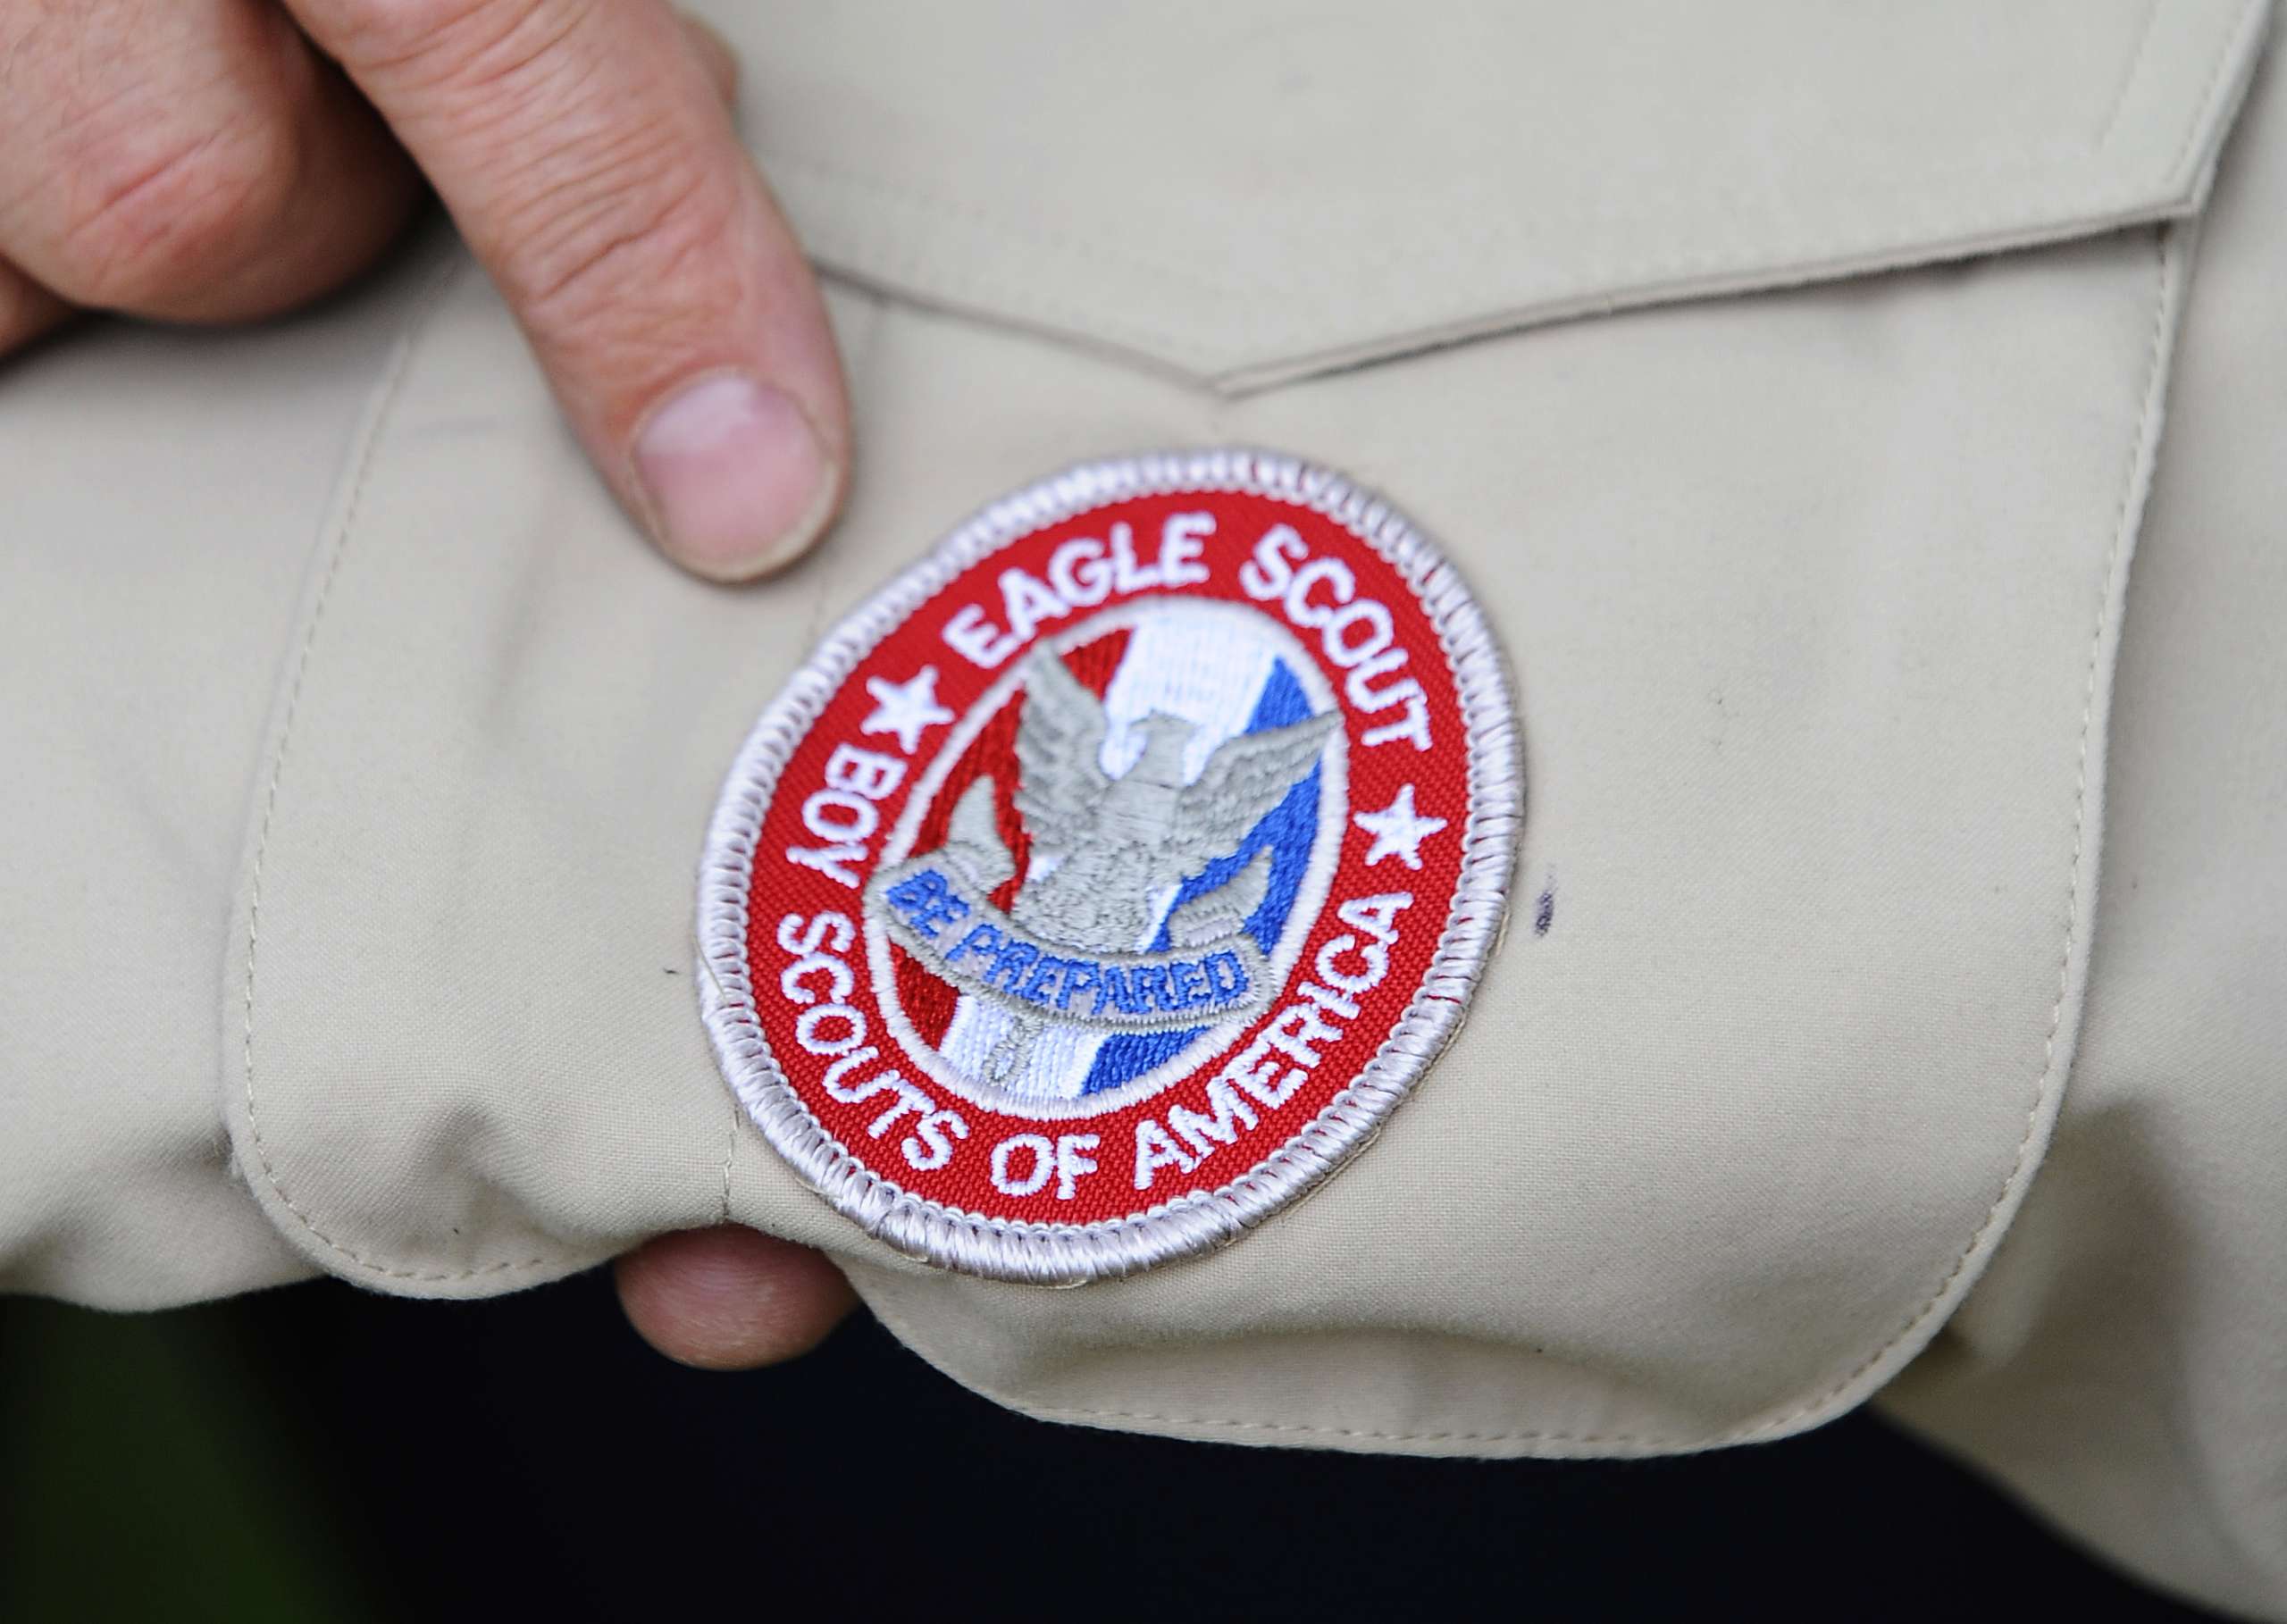 epa08225658 (FILE) - A badge of the Boy Scouts of America is photographed in Grapevine, Texas, USA, 23 May 2013 (reissued 18 February 2020). According to media reports, the Boy Scouts of America organisation has filed for bankruptcy in order to build a fund for victims of alleged sexual abuse within the organisation.  EPA/RALPH LAUER | 